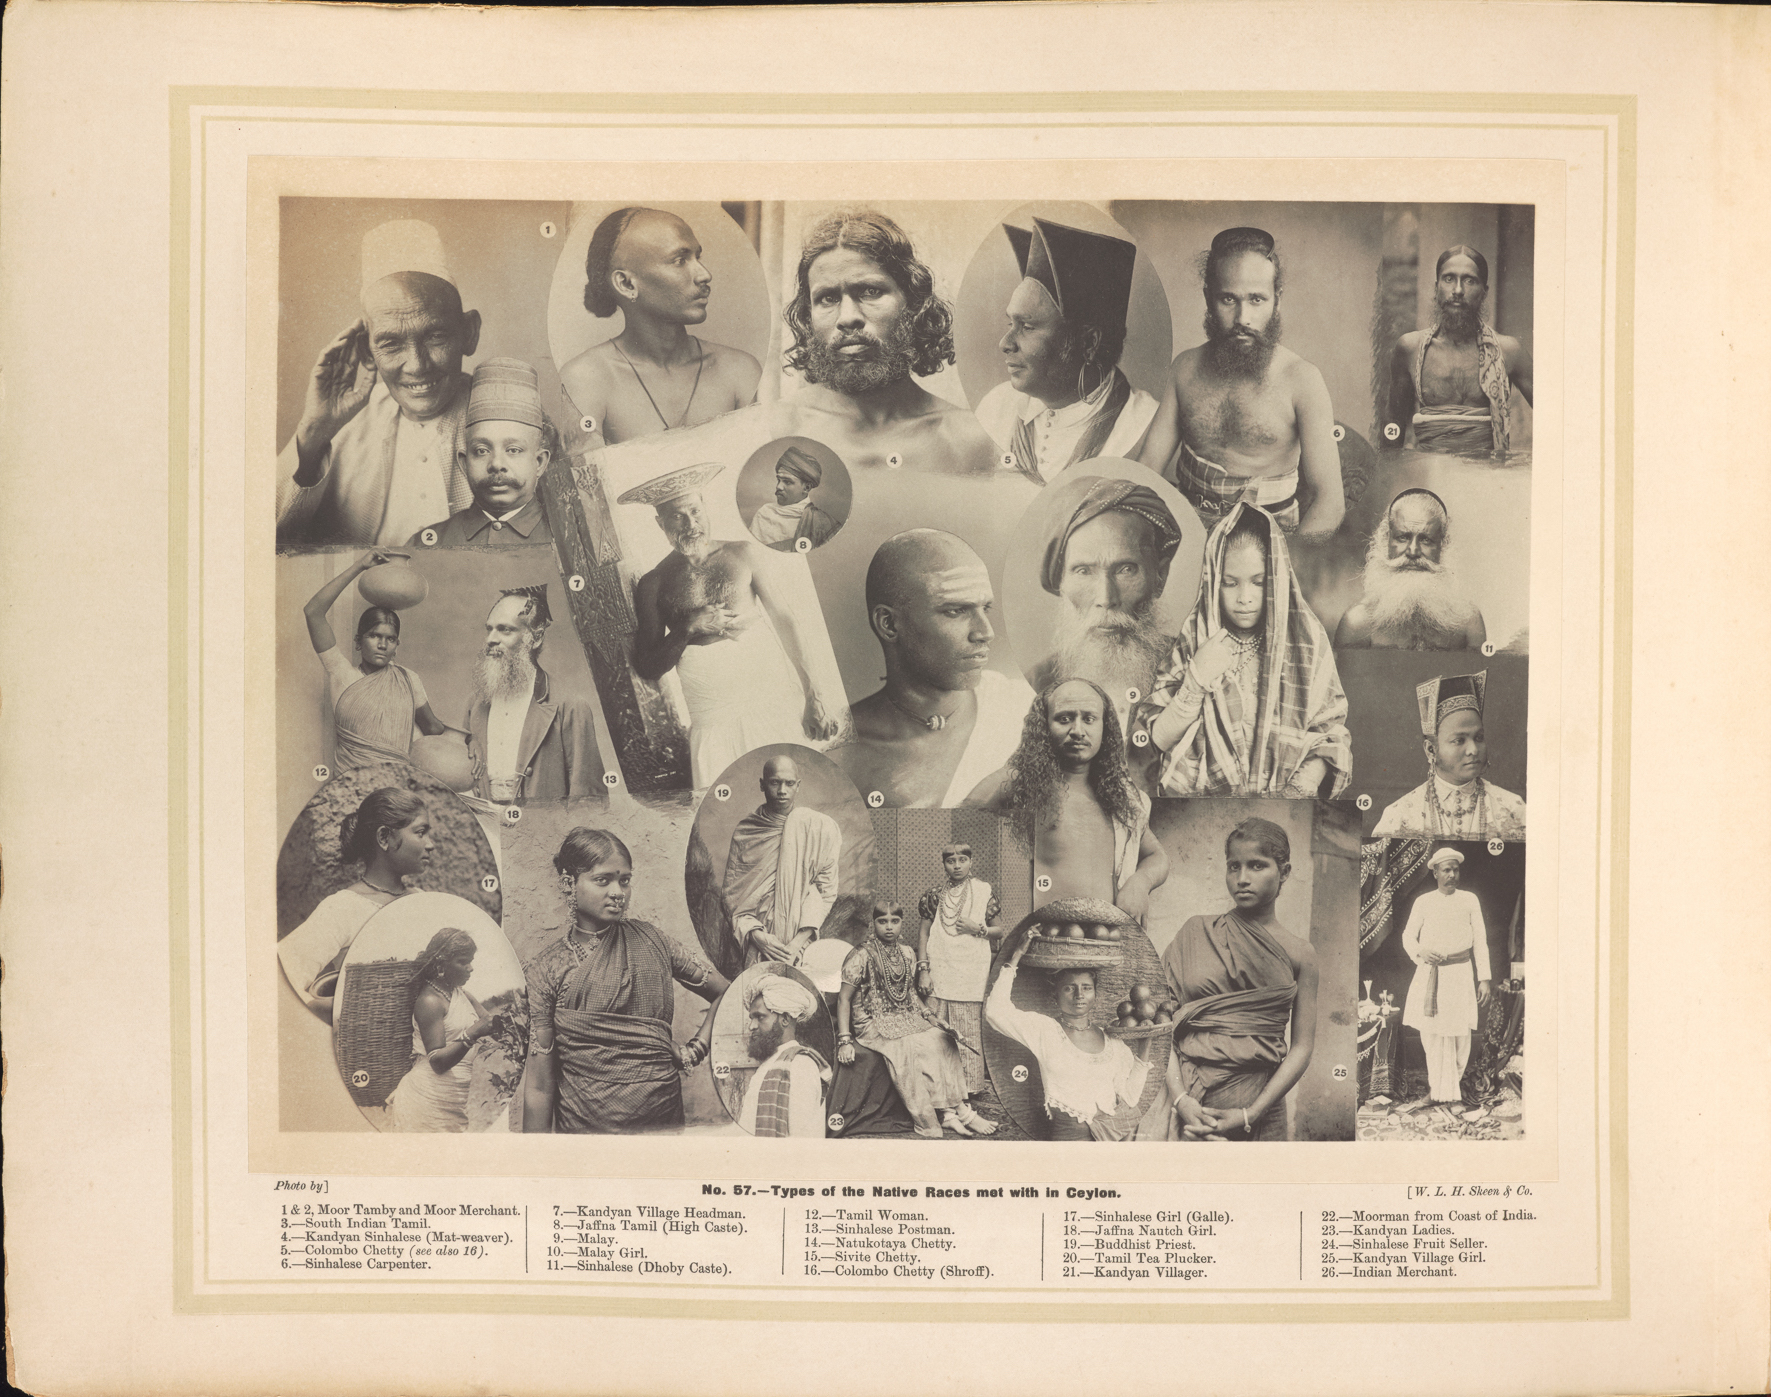 Figure 5: W.L.H. Skeen & Company, “Types of Native Races met with in Ceylon,” The Royal Visit to Ceylon, April 1901, 1901. Reproduced by kind permission of the Syndics of Cambridge University Library (QM2/61).